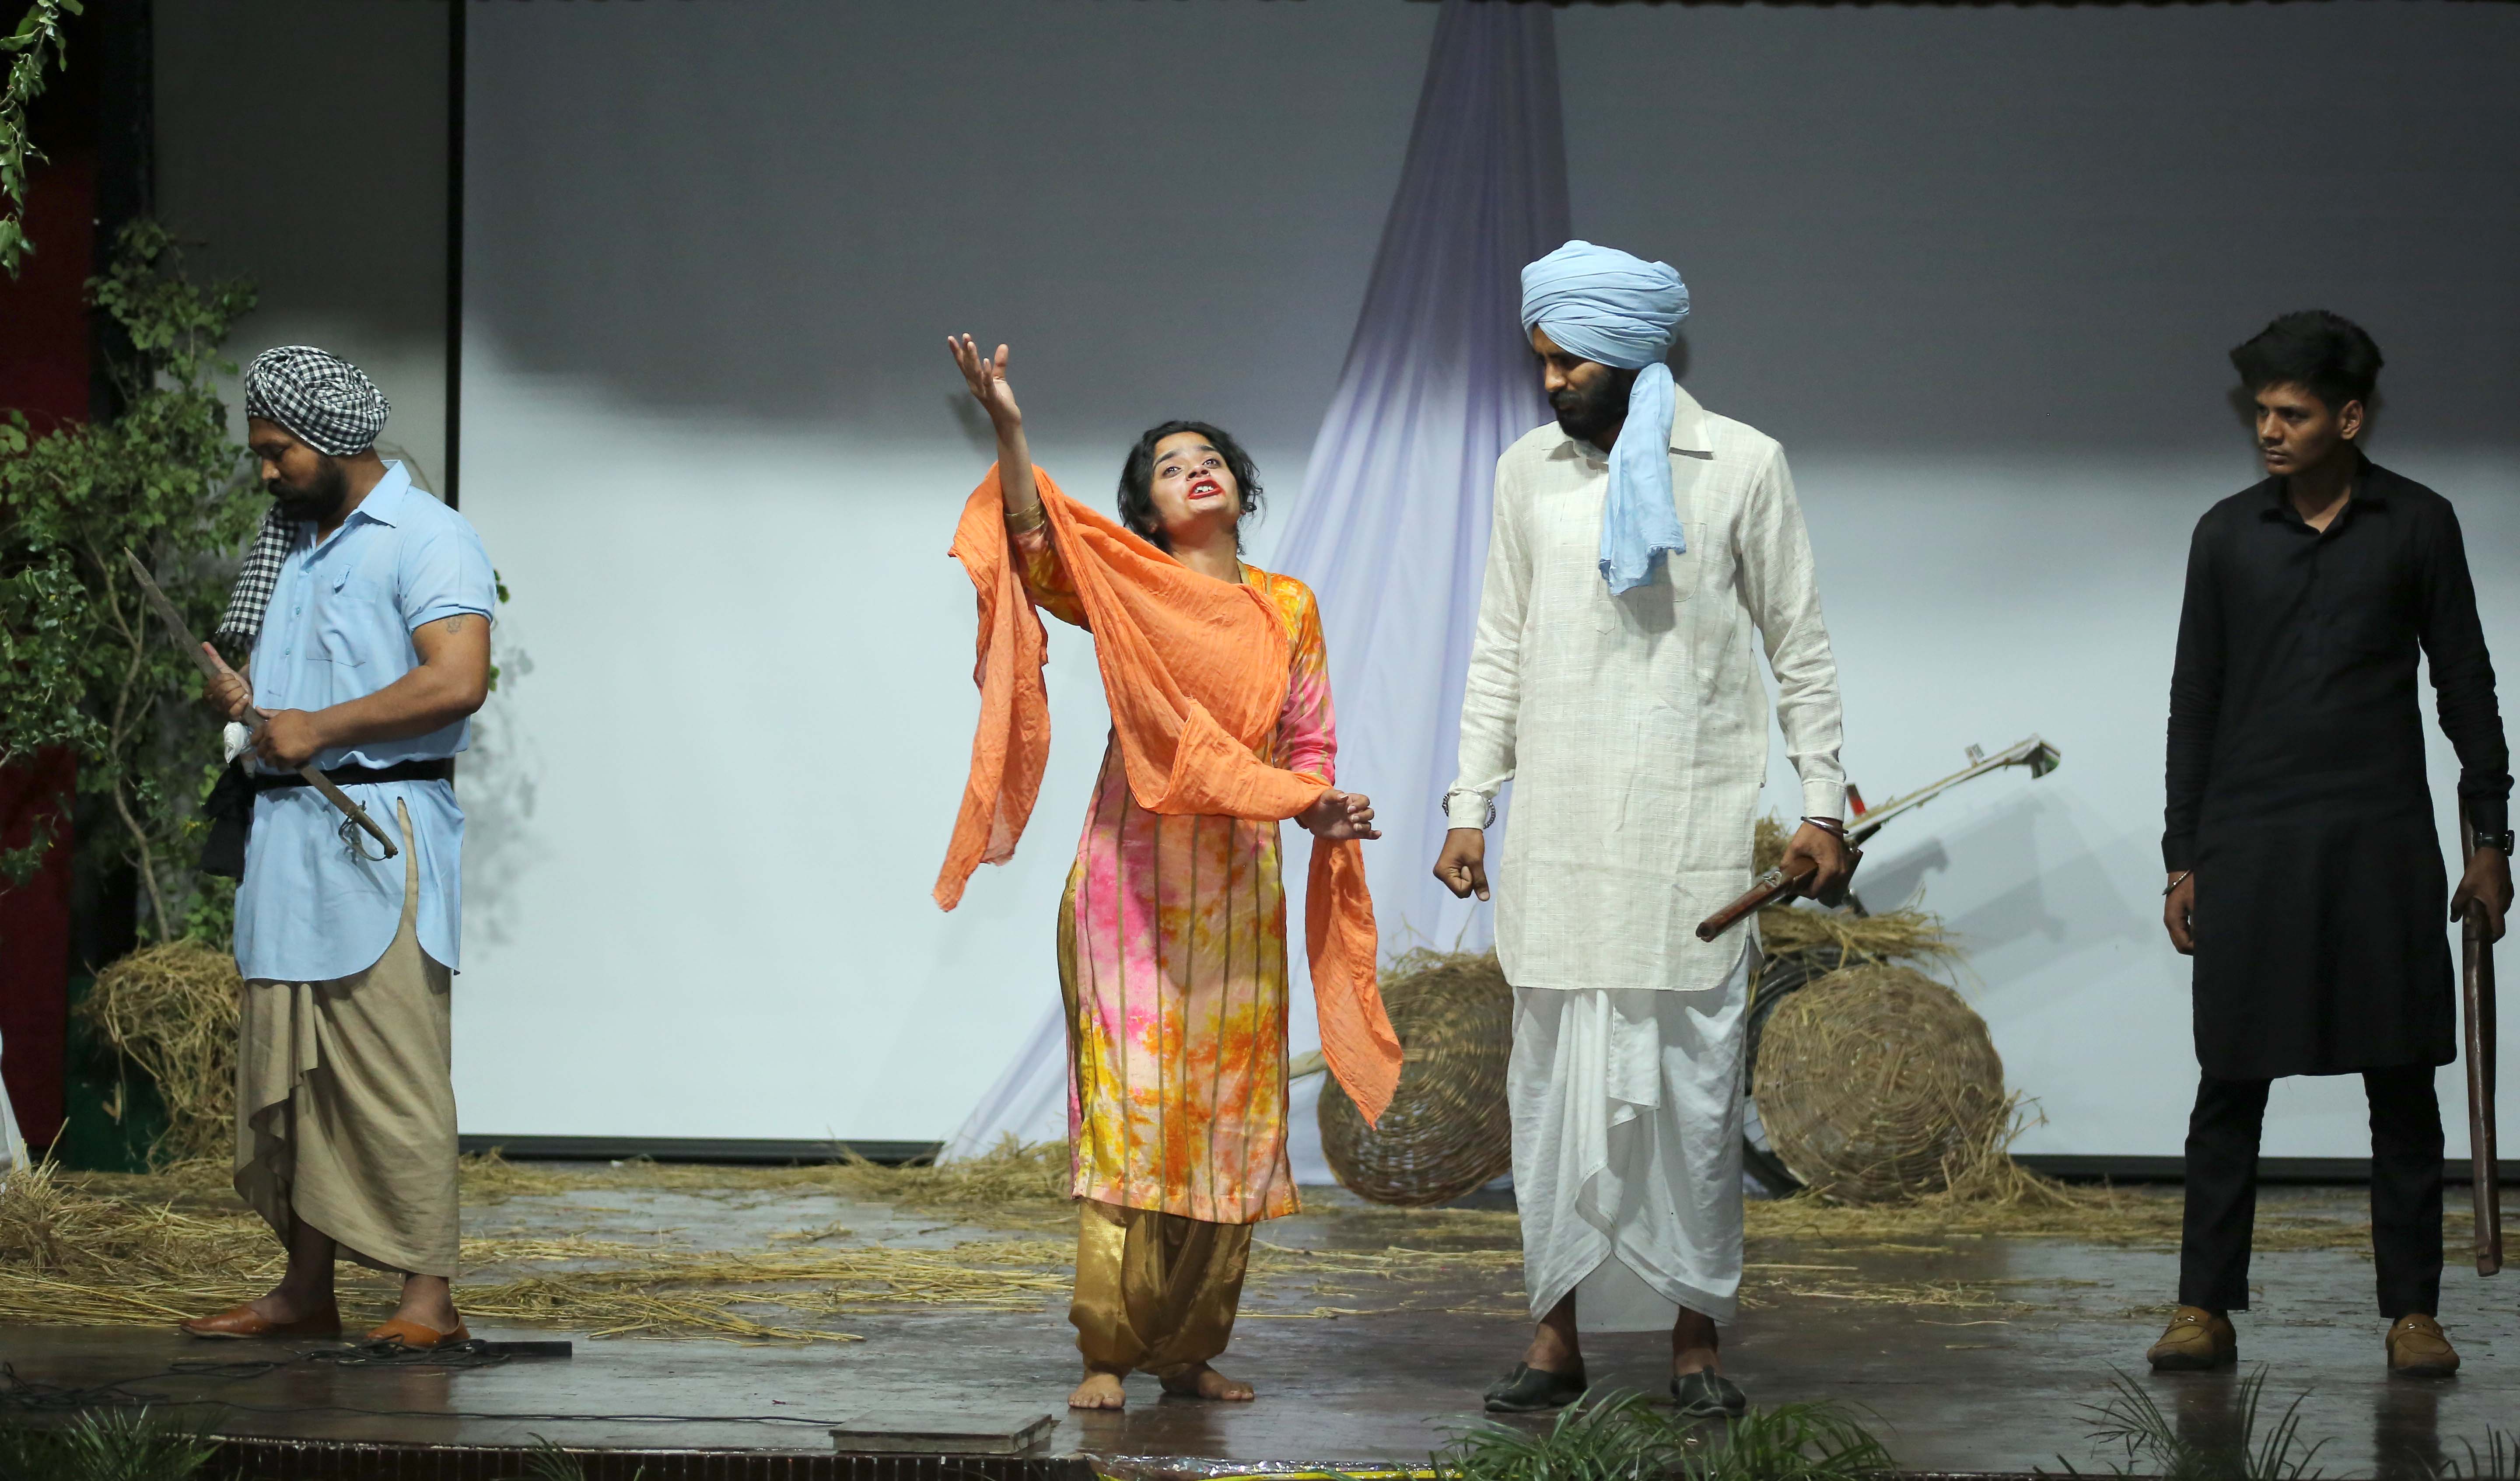 Students of LPU performing different aspects of life through stage play at SBRM Auditorium of Lovely Professional University (8)